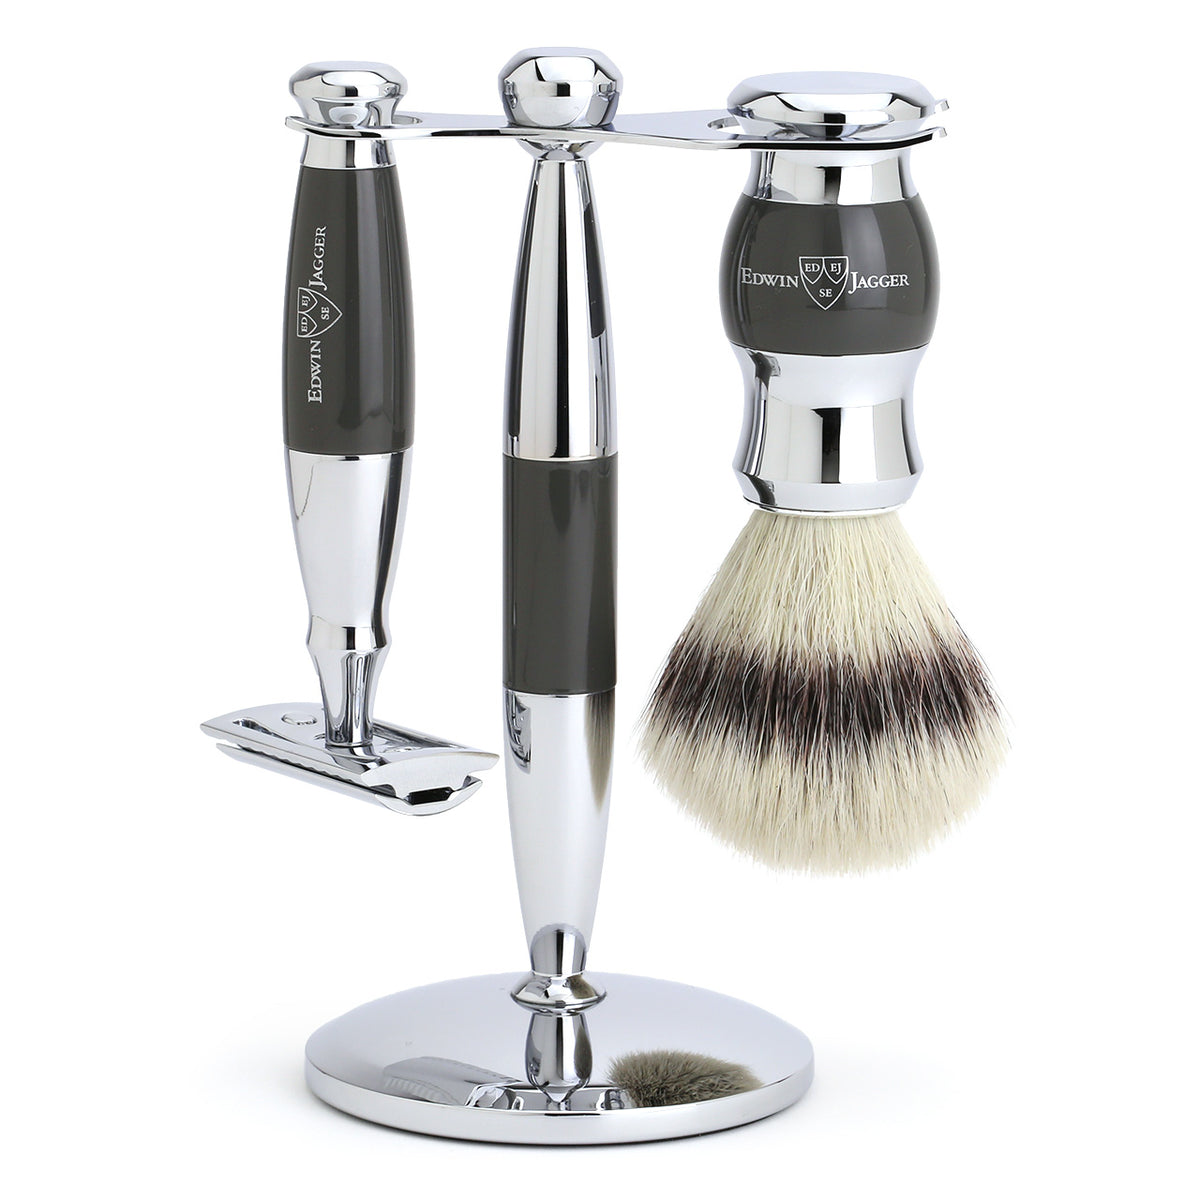 Edwin Jagger Shaving Set with Safety Razor, Shaving Brush and Stand - Grey